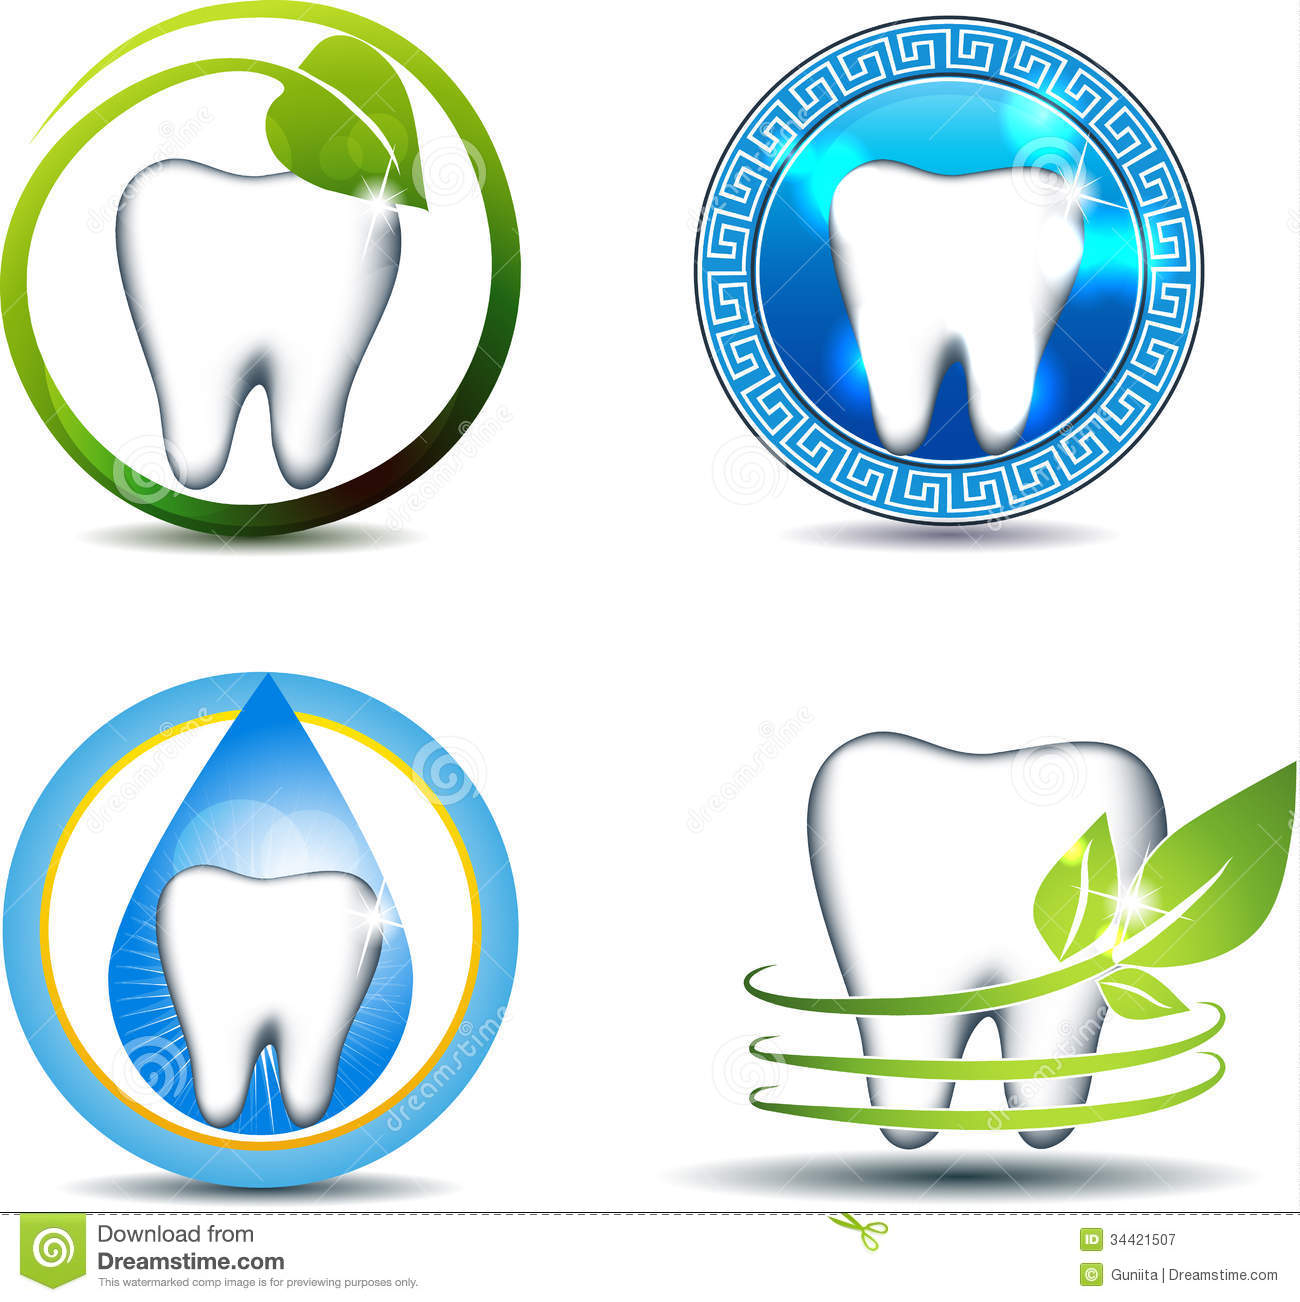 Healthy Teeth Symbols Various Designs  Tooth With Leafs And Drop